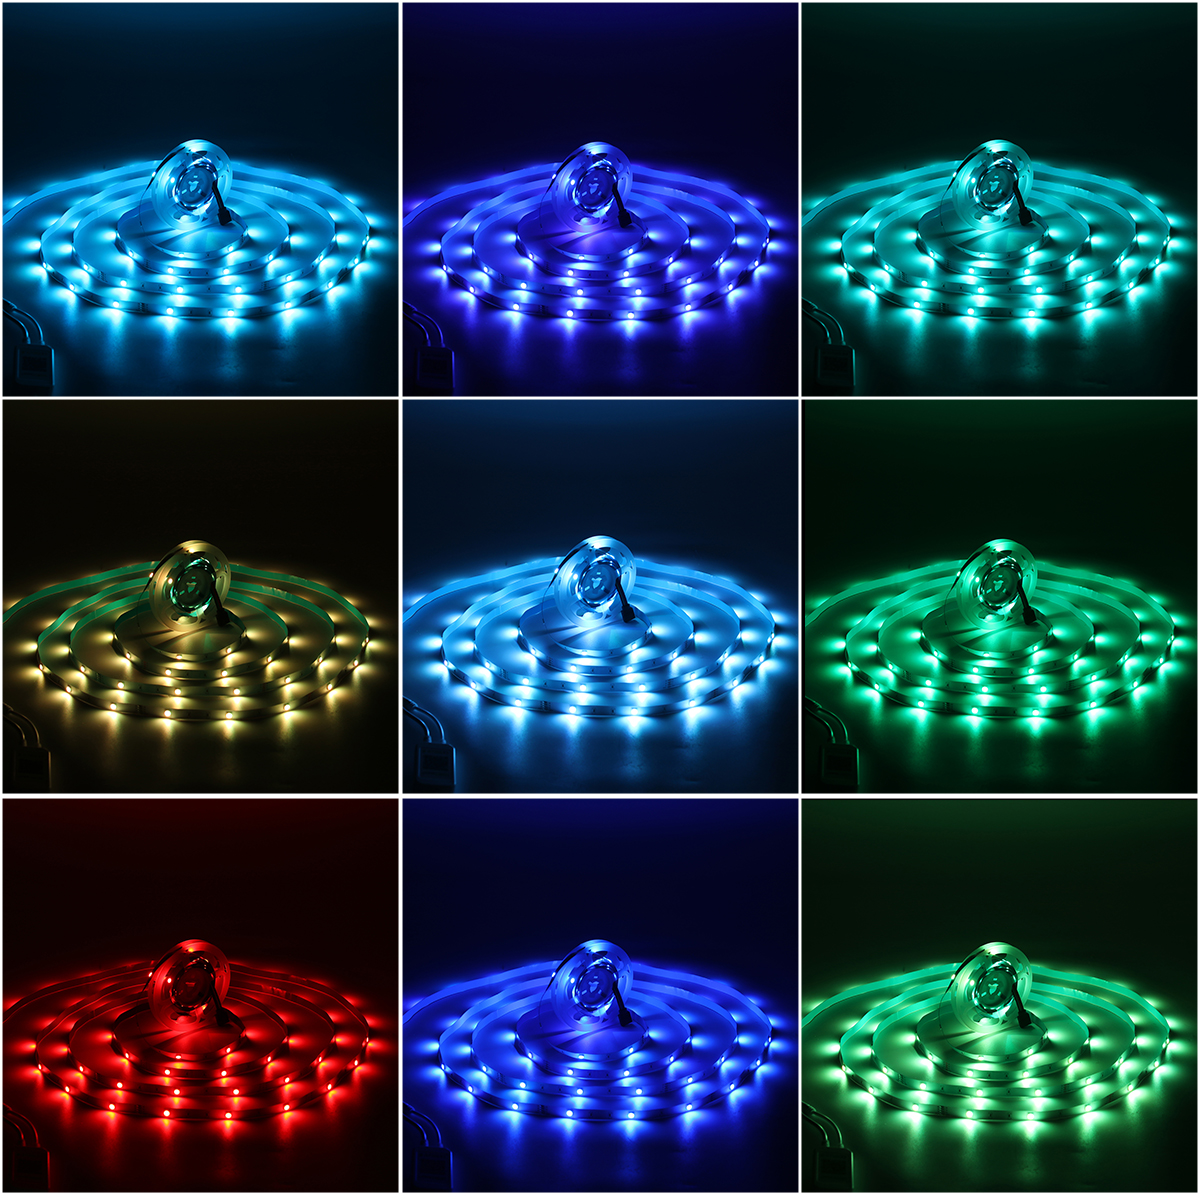 5101520M-RGB-LED-Light-Strip-with-40Key-Remote-Control-Cuttable-Party-Christmas-18LED1M-1837716-3